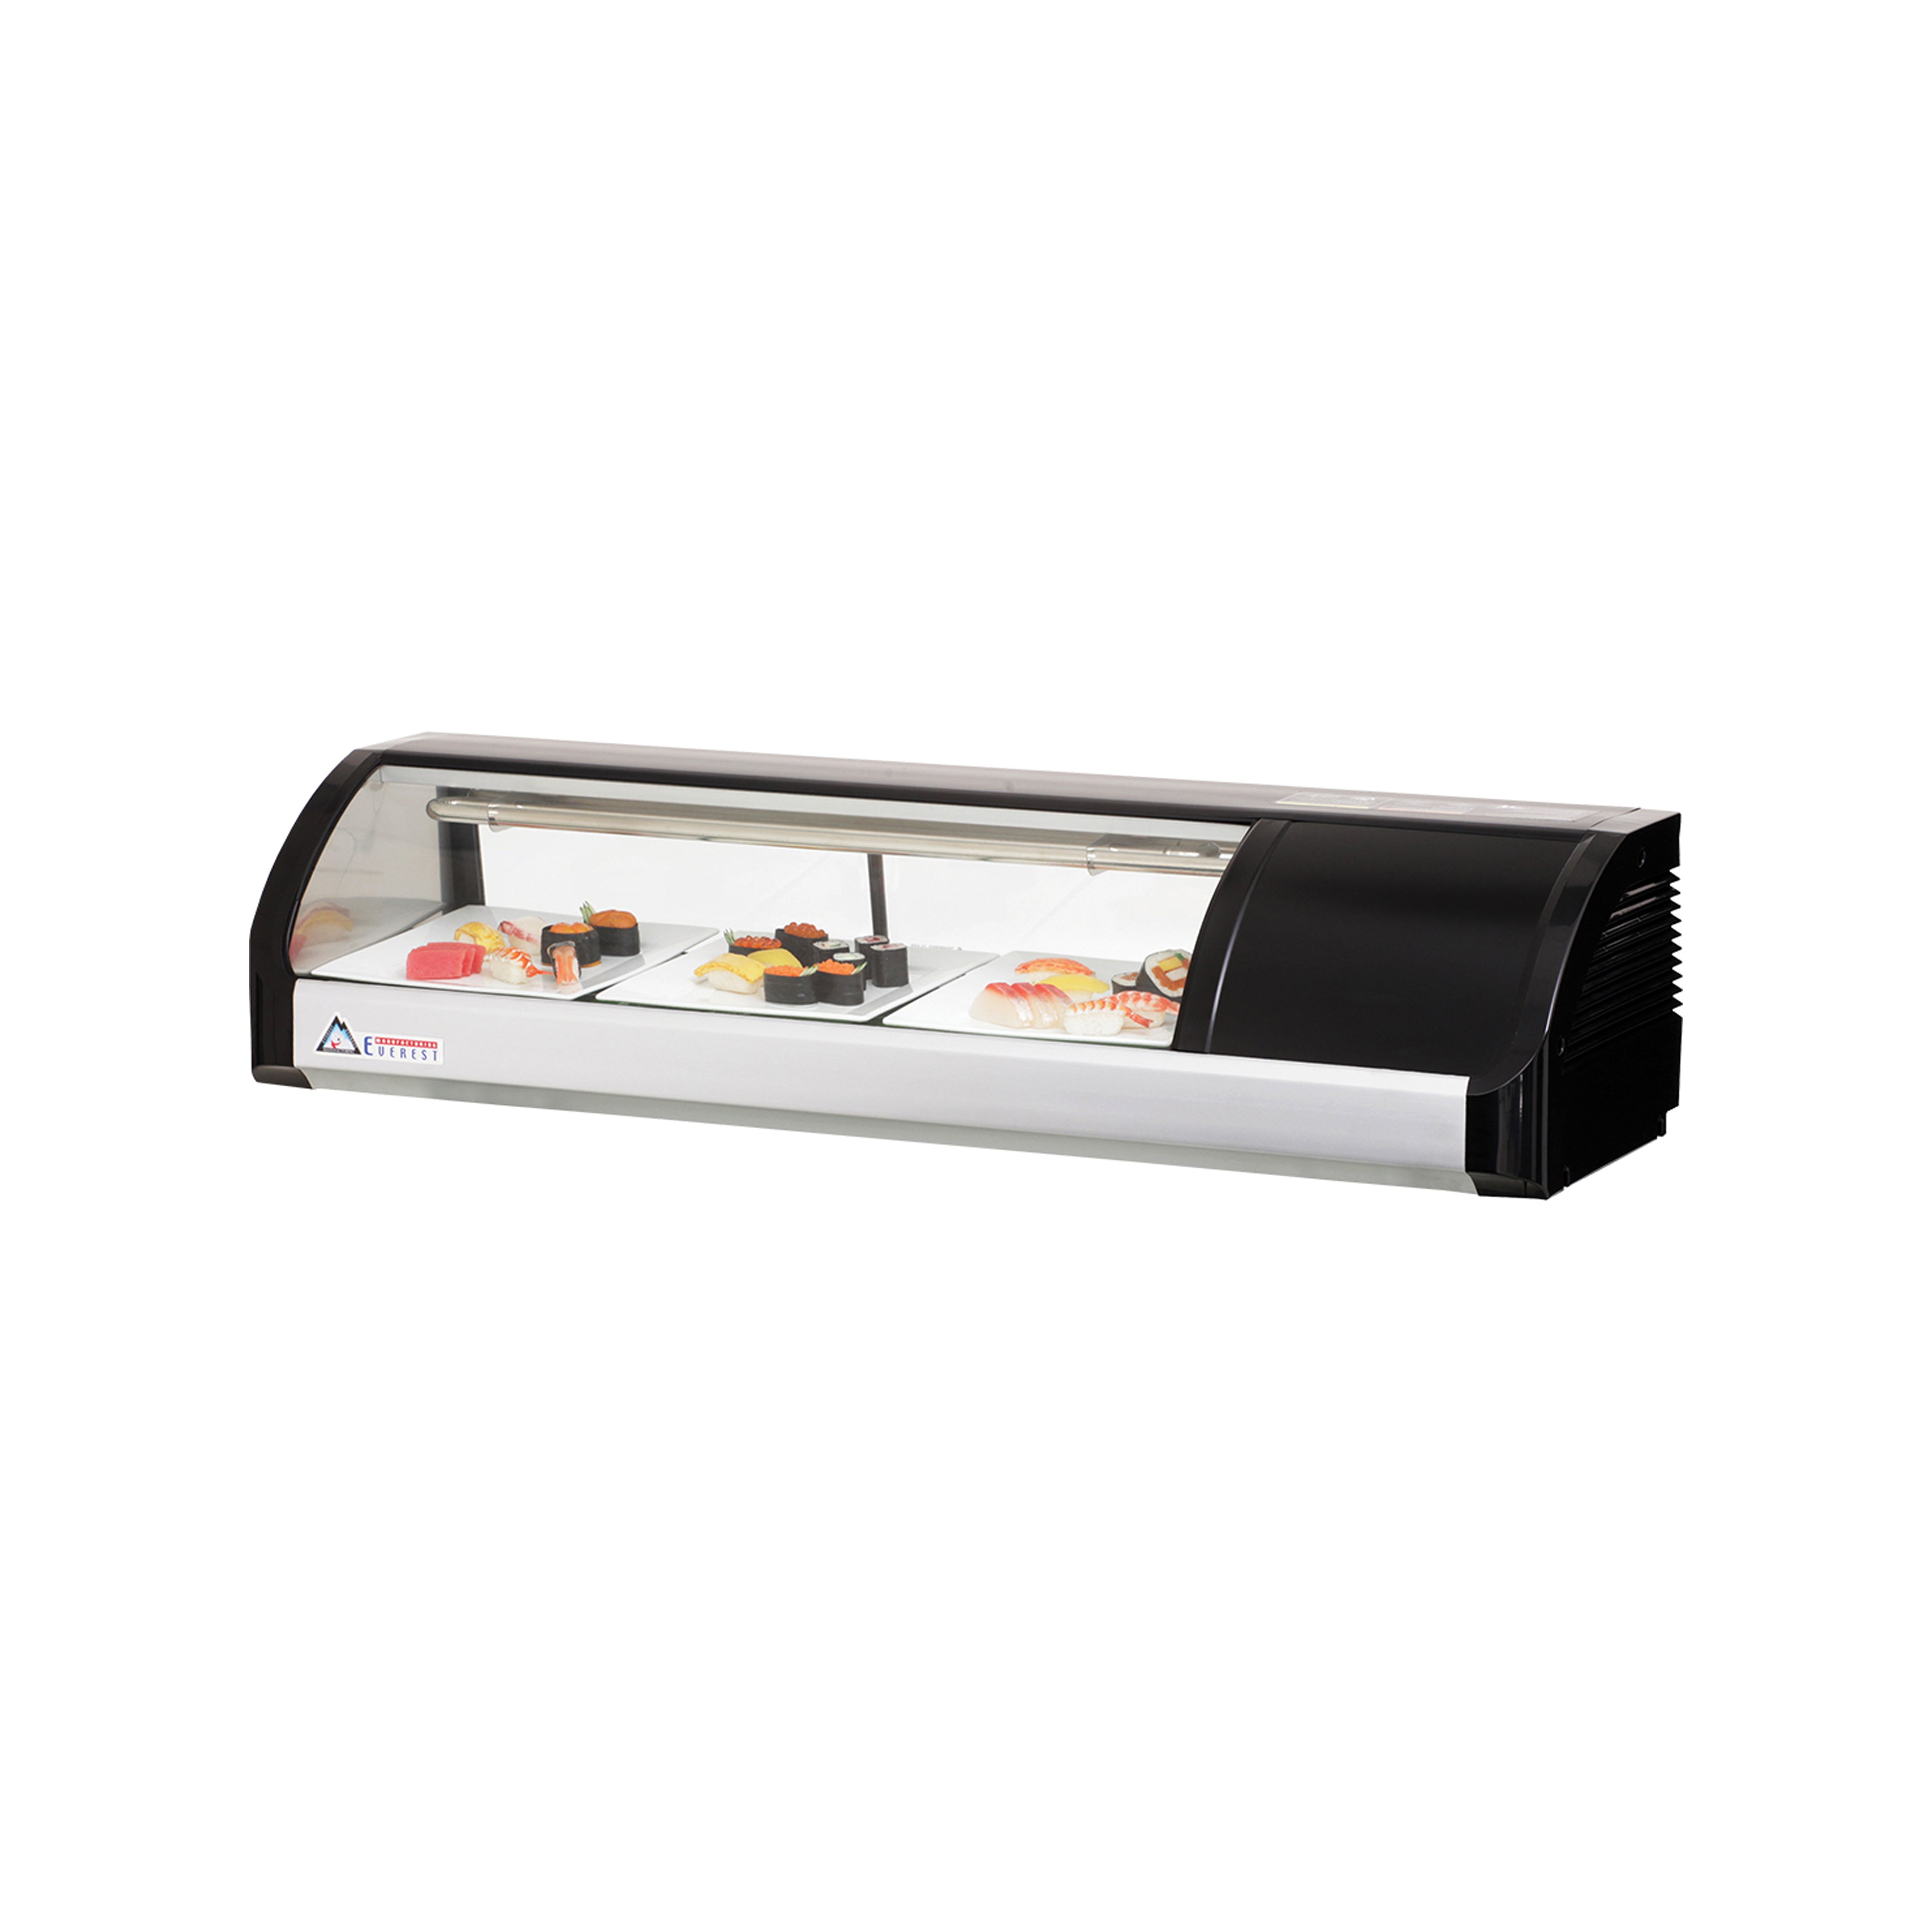 Everest - ESC47R, 48" Countertop Refrigerated Display Cases